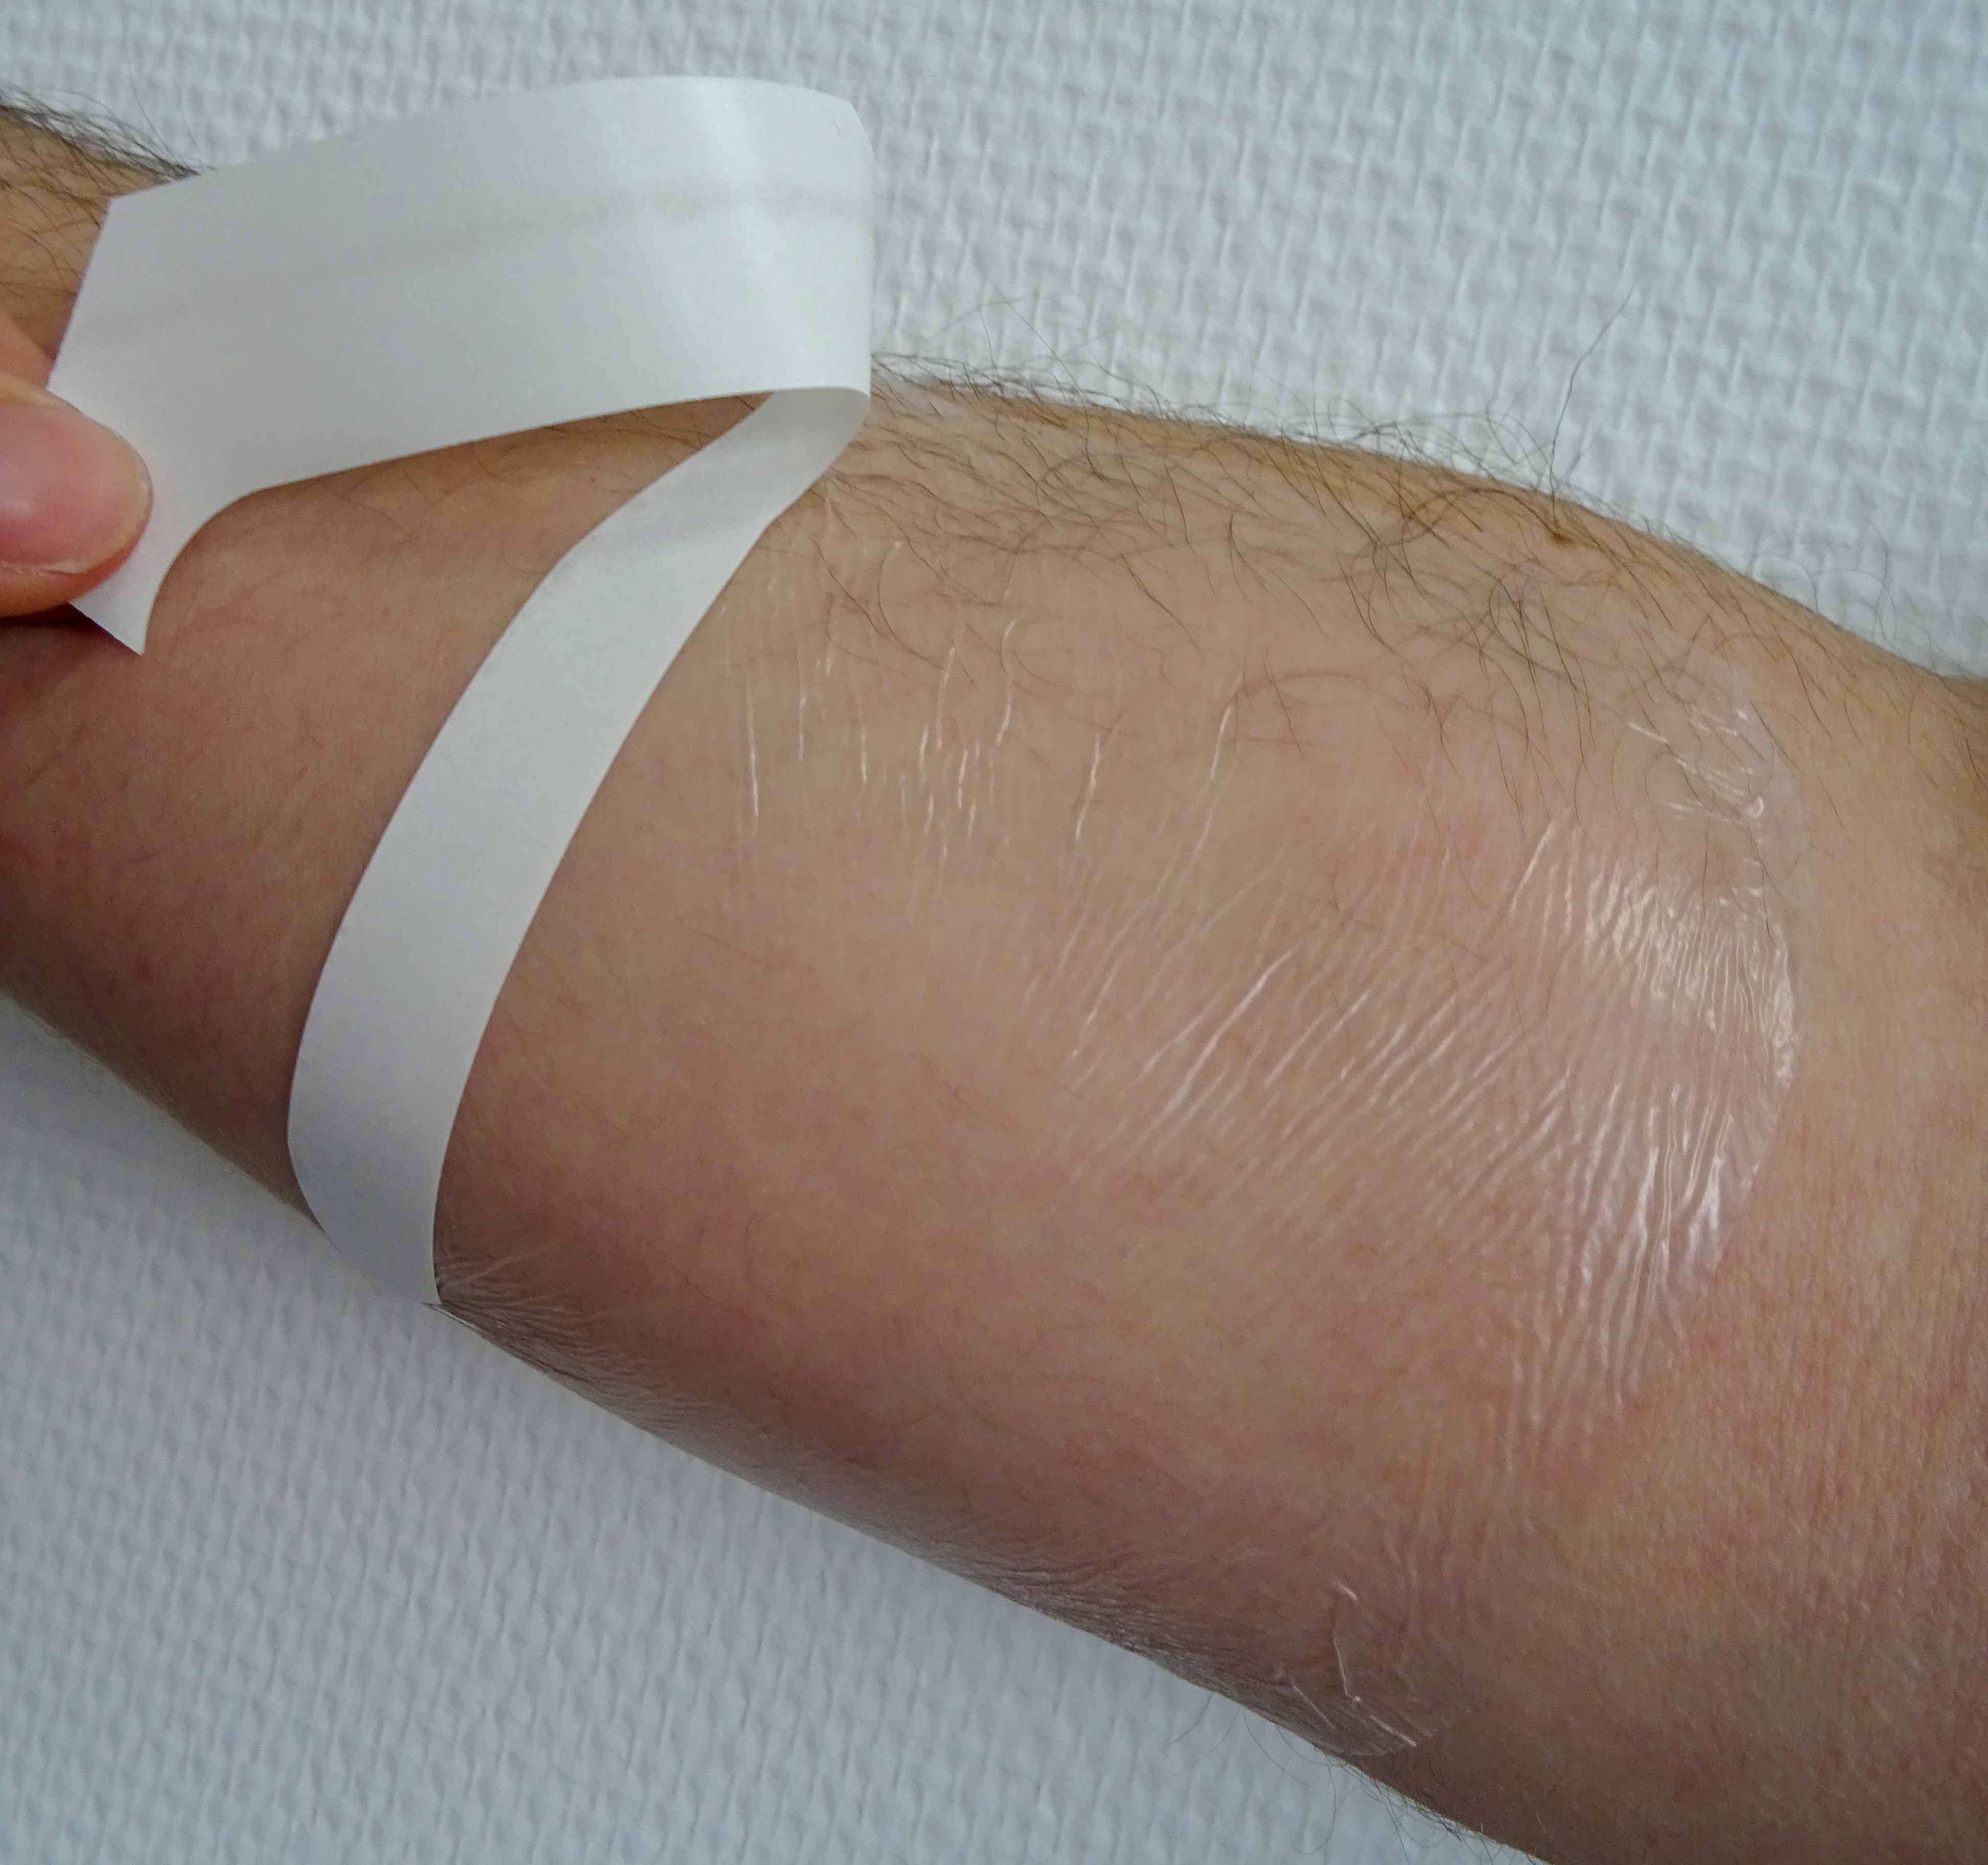 <ul><li>Single sided polyurethane film with silicone gel</li><li>Designed to protect insertion points as well as perilesional and sensitive skin</li><li>Can be removed without pain or trauma thanks to the silicone gel </li></ul>